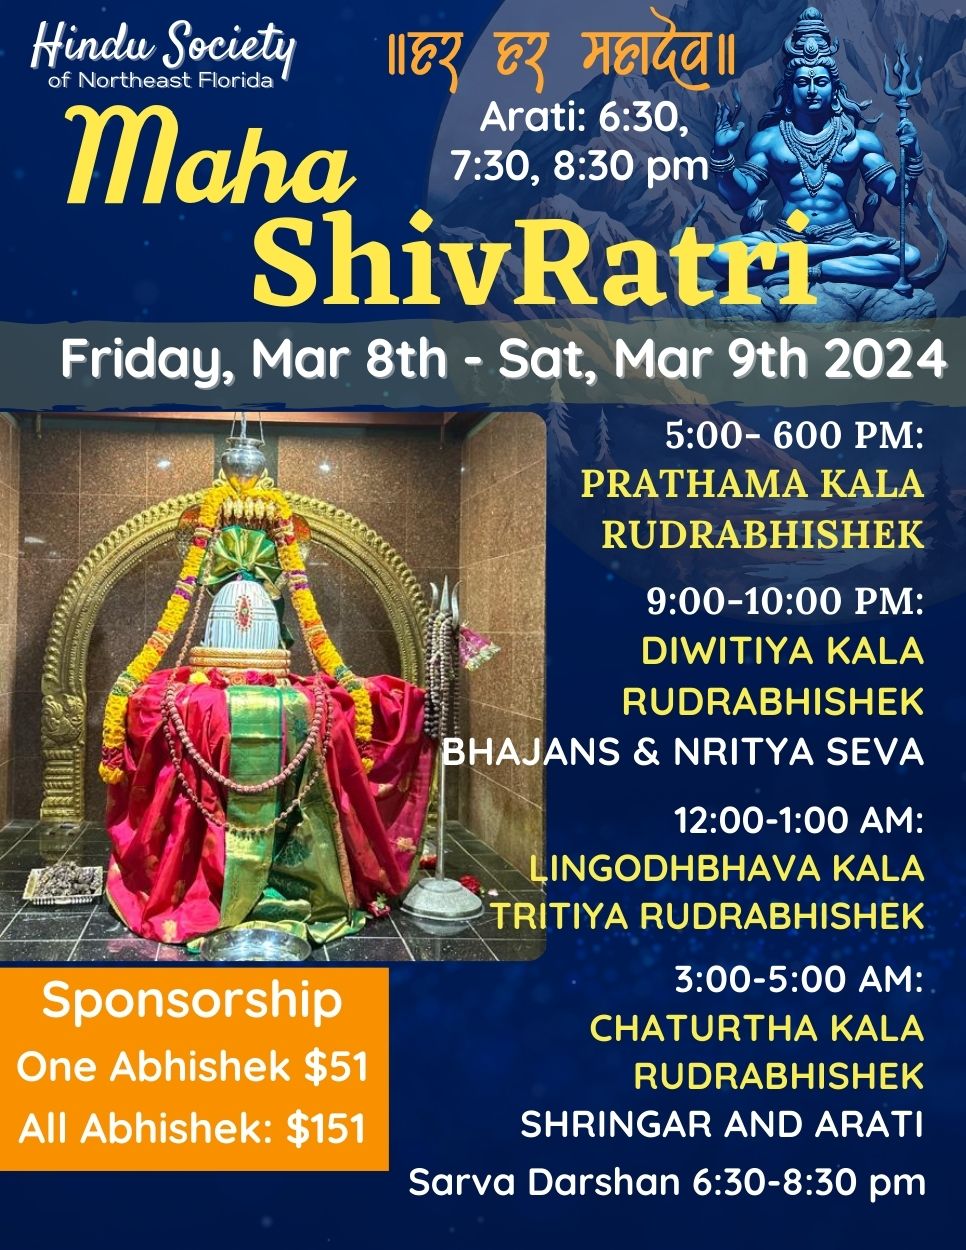 Maha Shivratri Celebrations at HSNEF on Friday March 8th to Saturday 9th March. with Sarvadarshan and Arati at 6:30, 7:30 and 8:30 PM